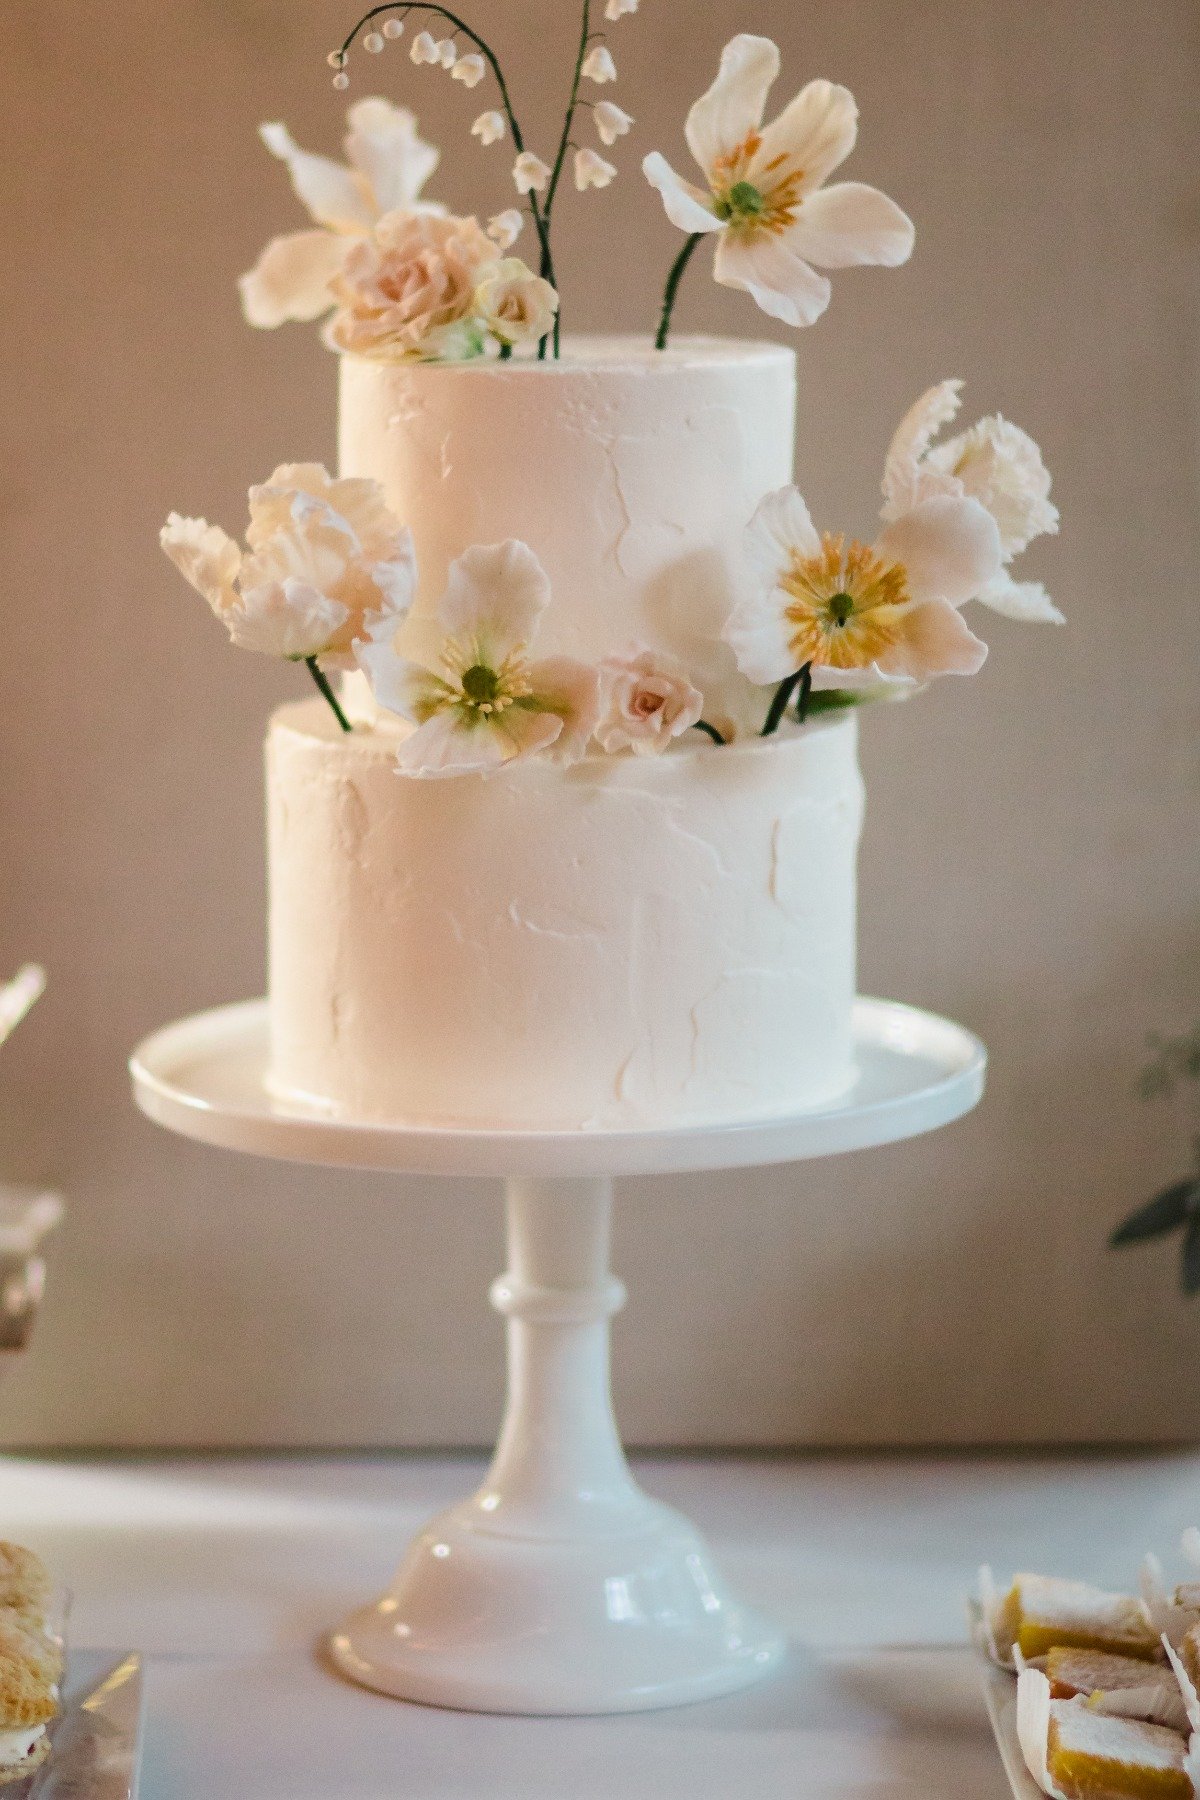 white wedding cake with sugar flowers from Lele Patisserie